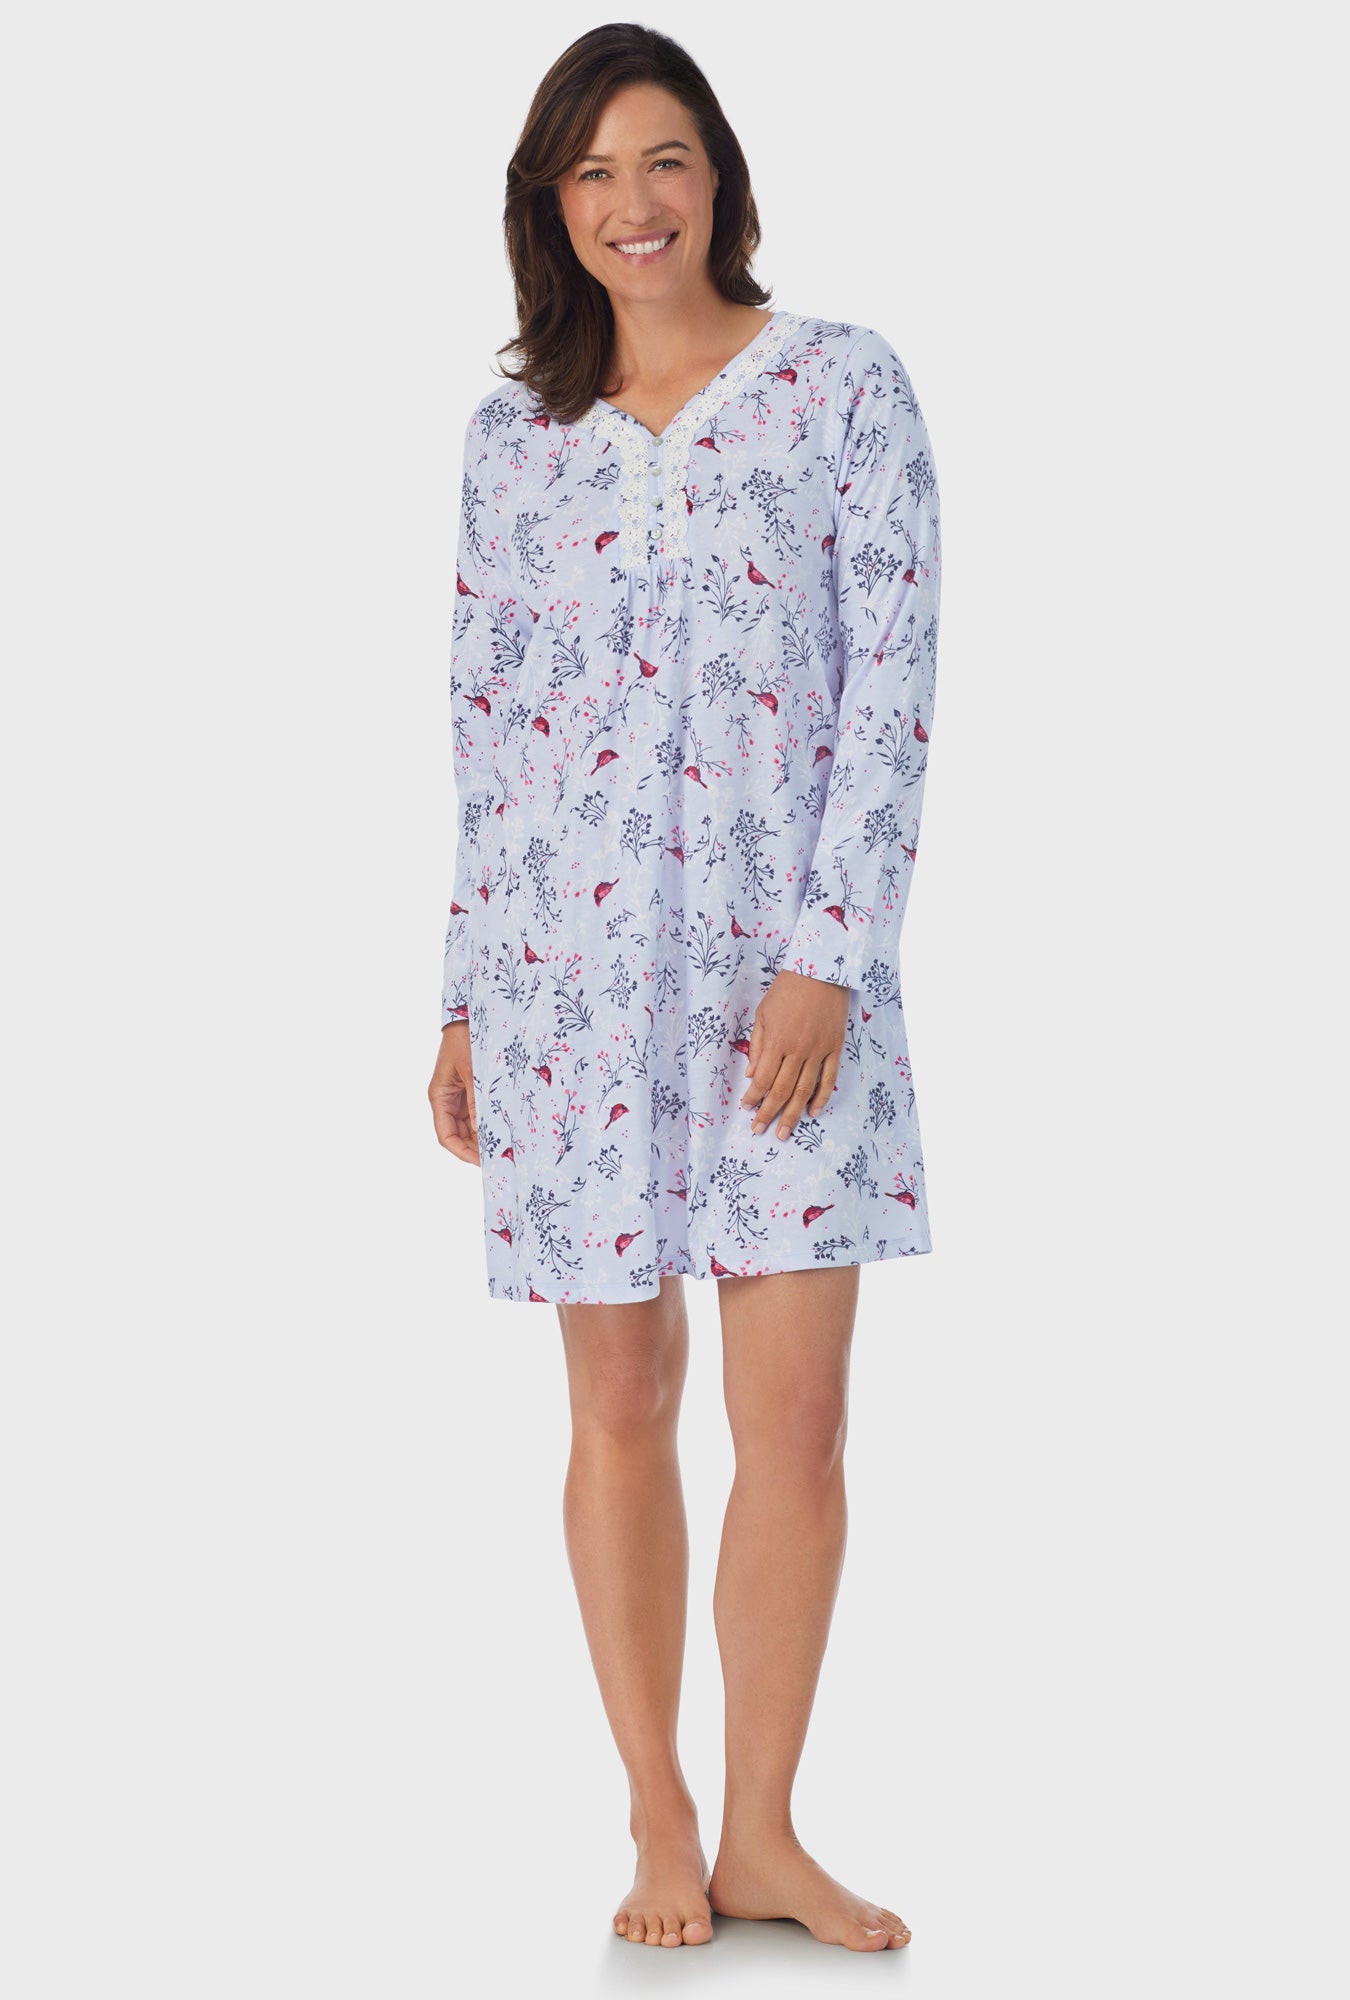 A lady wearing white Long Sleeve Nightgown with Winter Winter Blue print